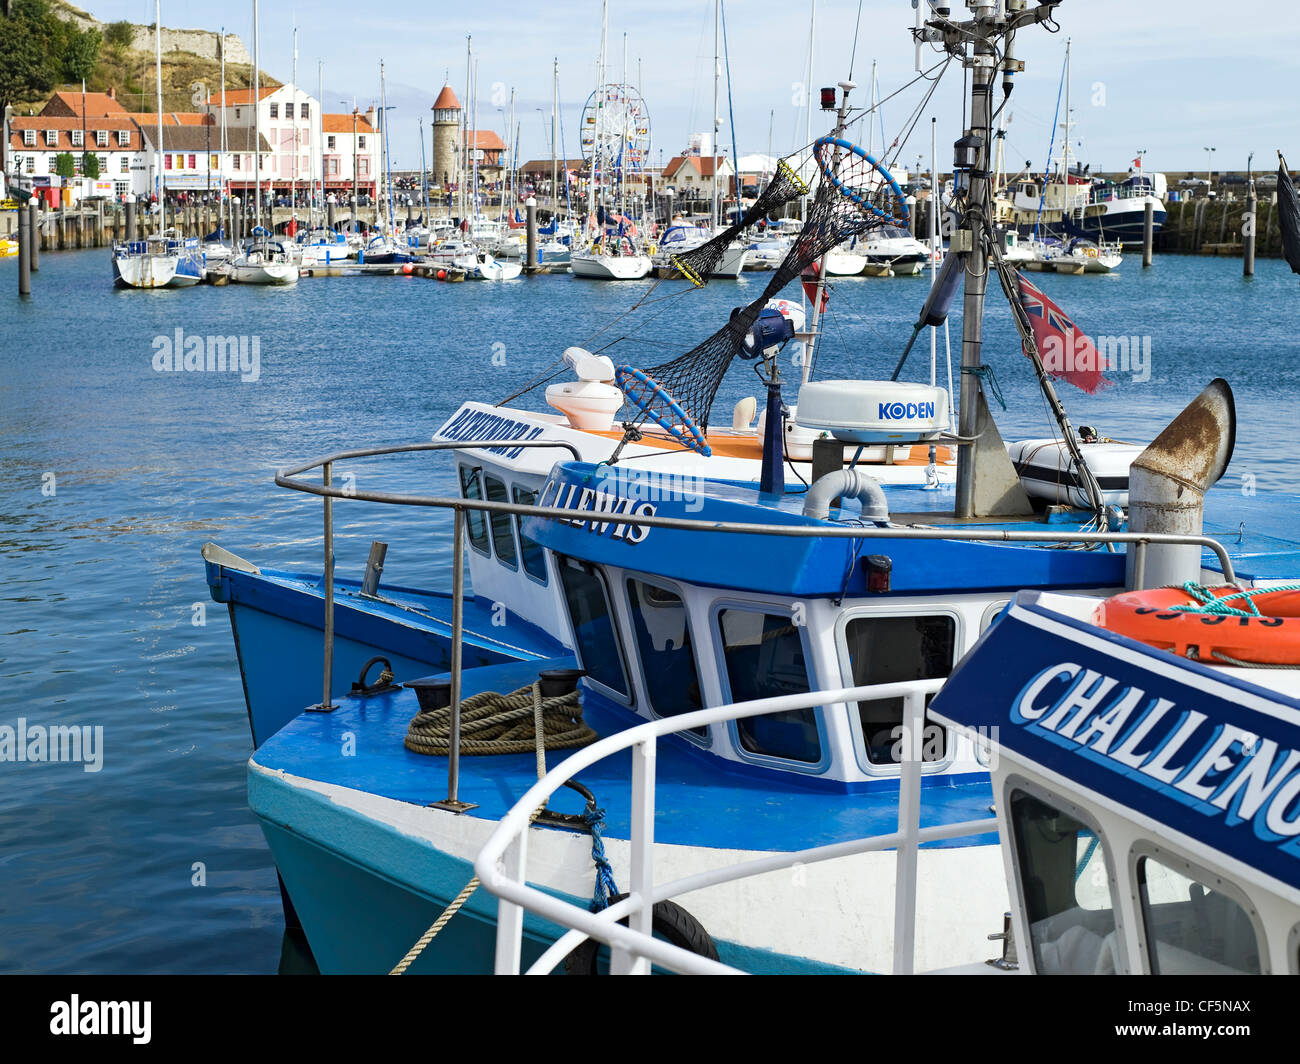 Yachts and fishing boats moored in Scarborough Harbour. Stock Photo